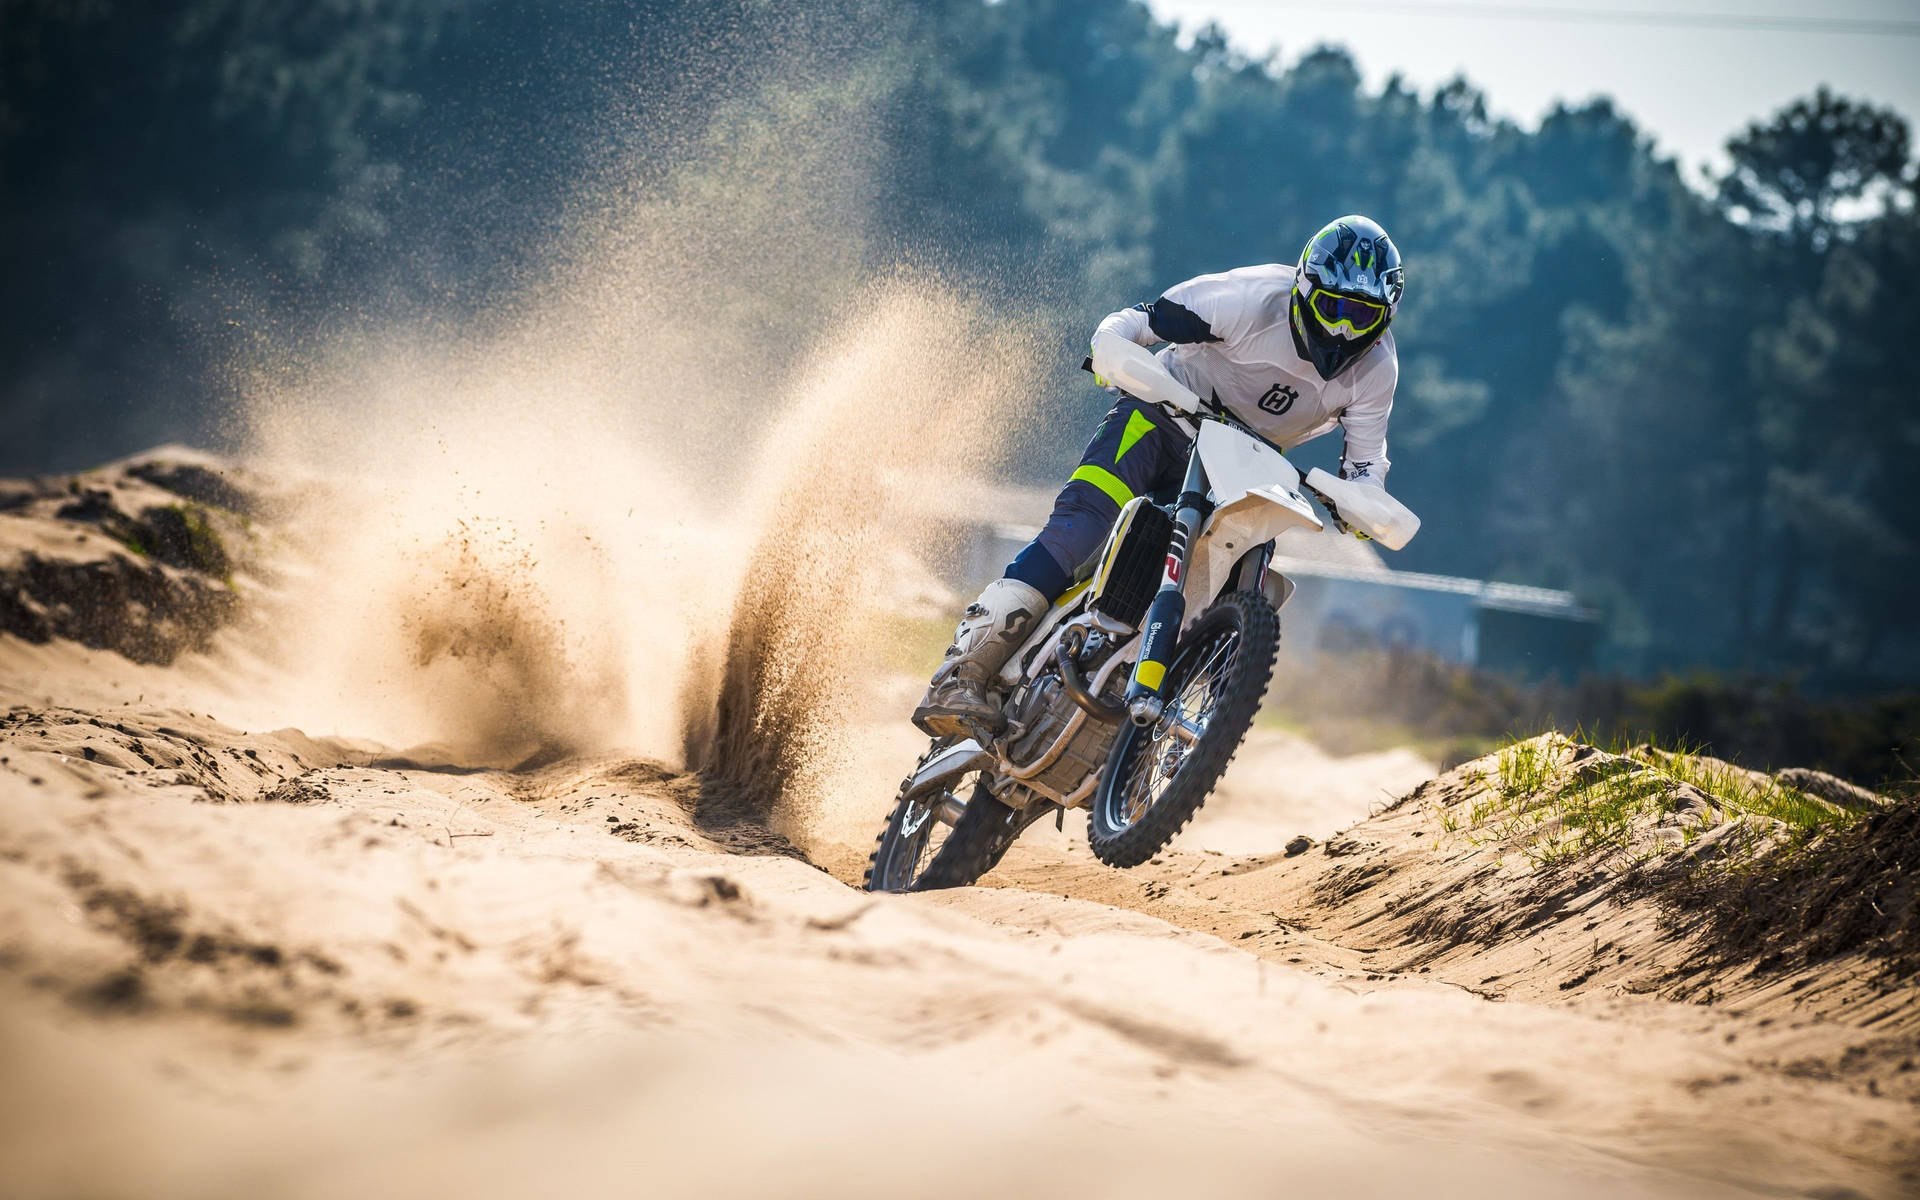 Exciting Motocross Racing In Action Background